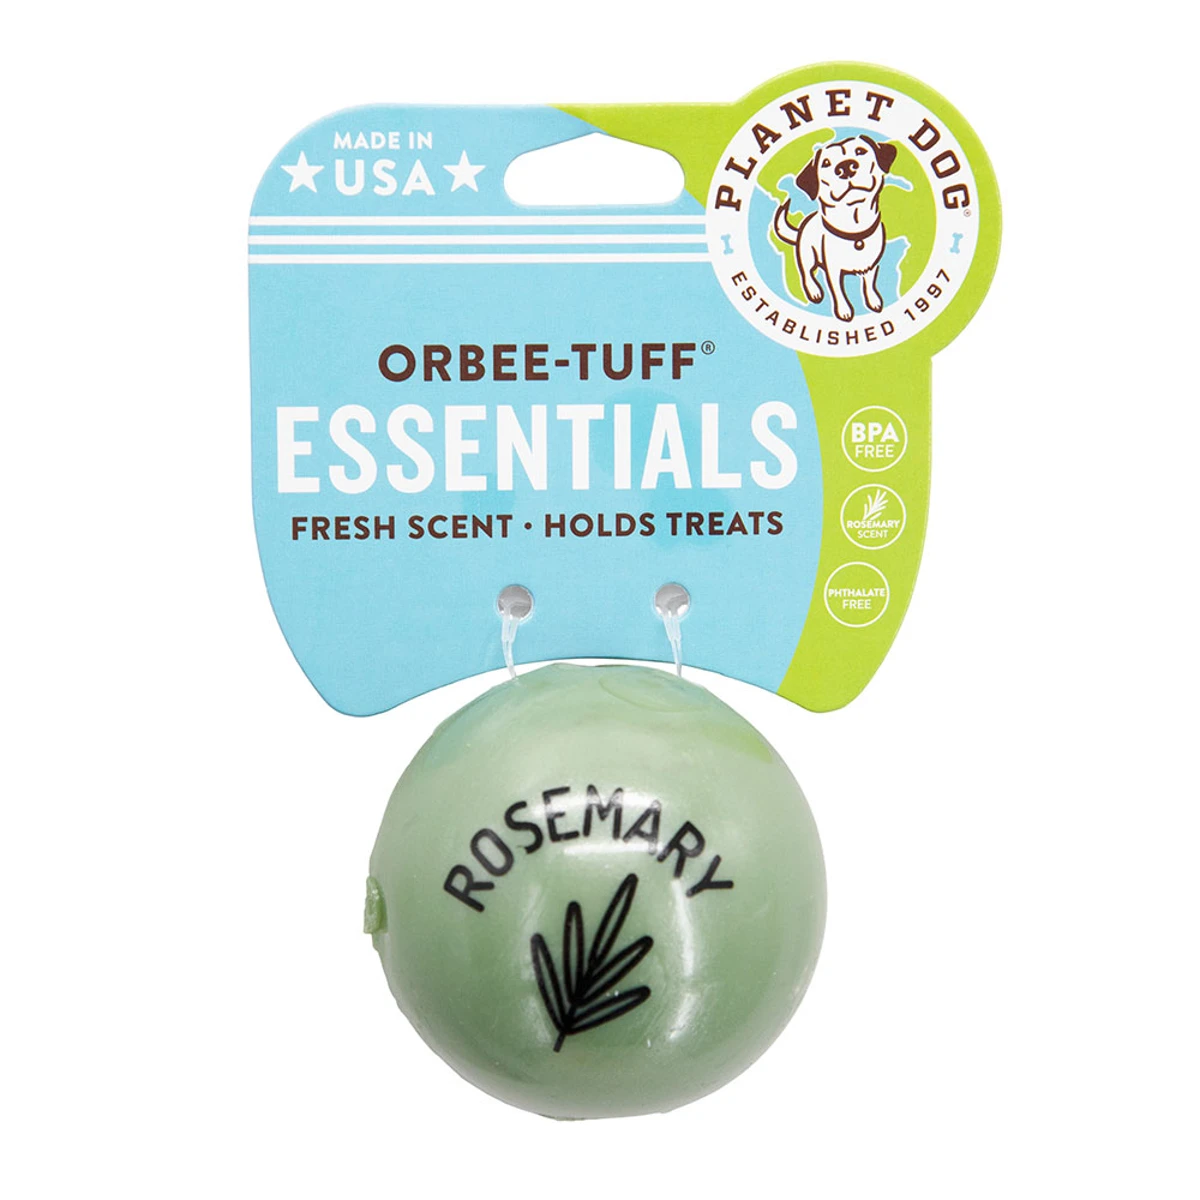 Planet Dog Orbee-Tuff Essentials Scented Ball Dog Toy - Rosemary